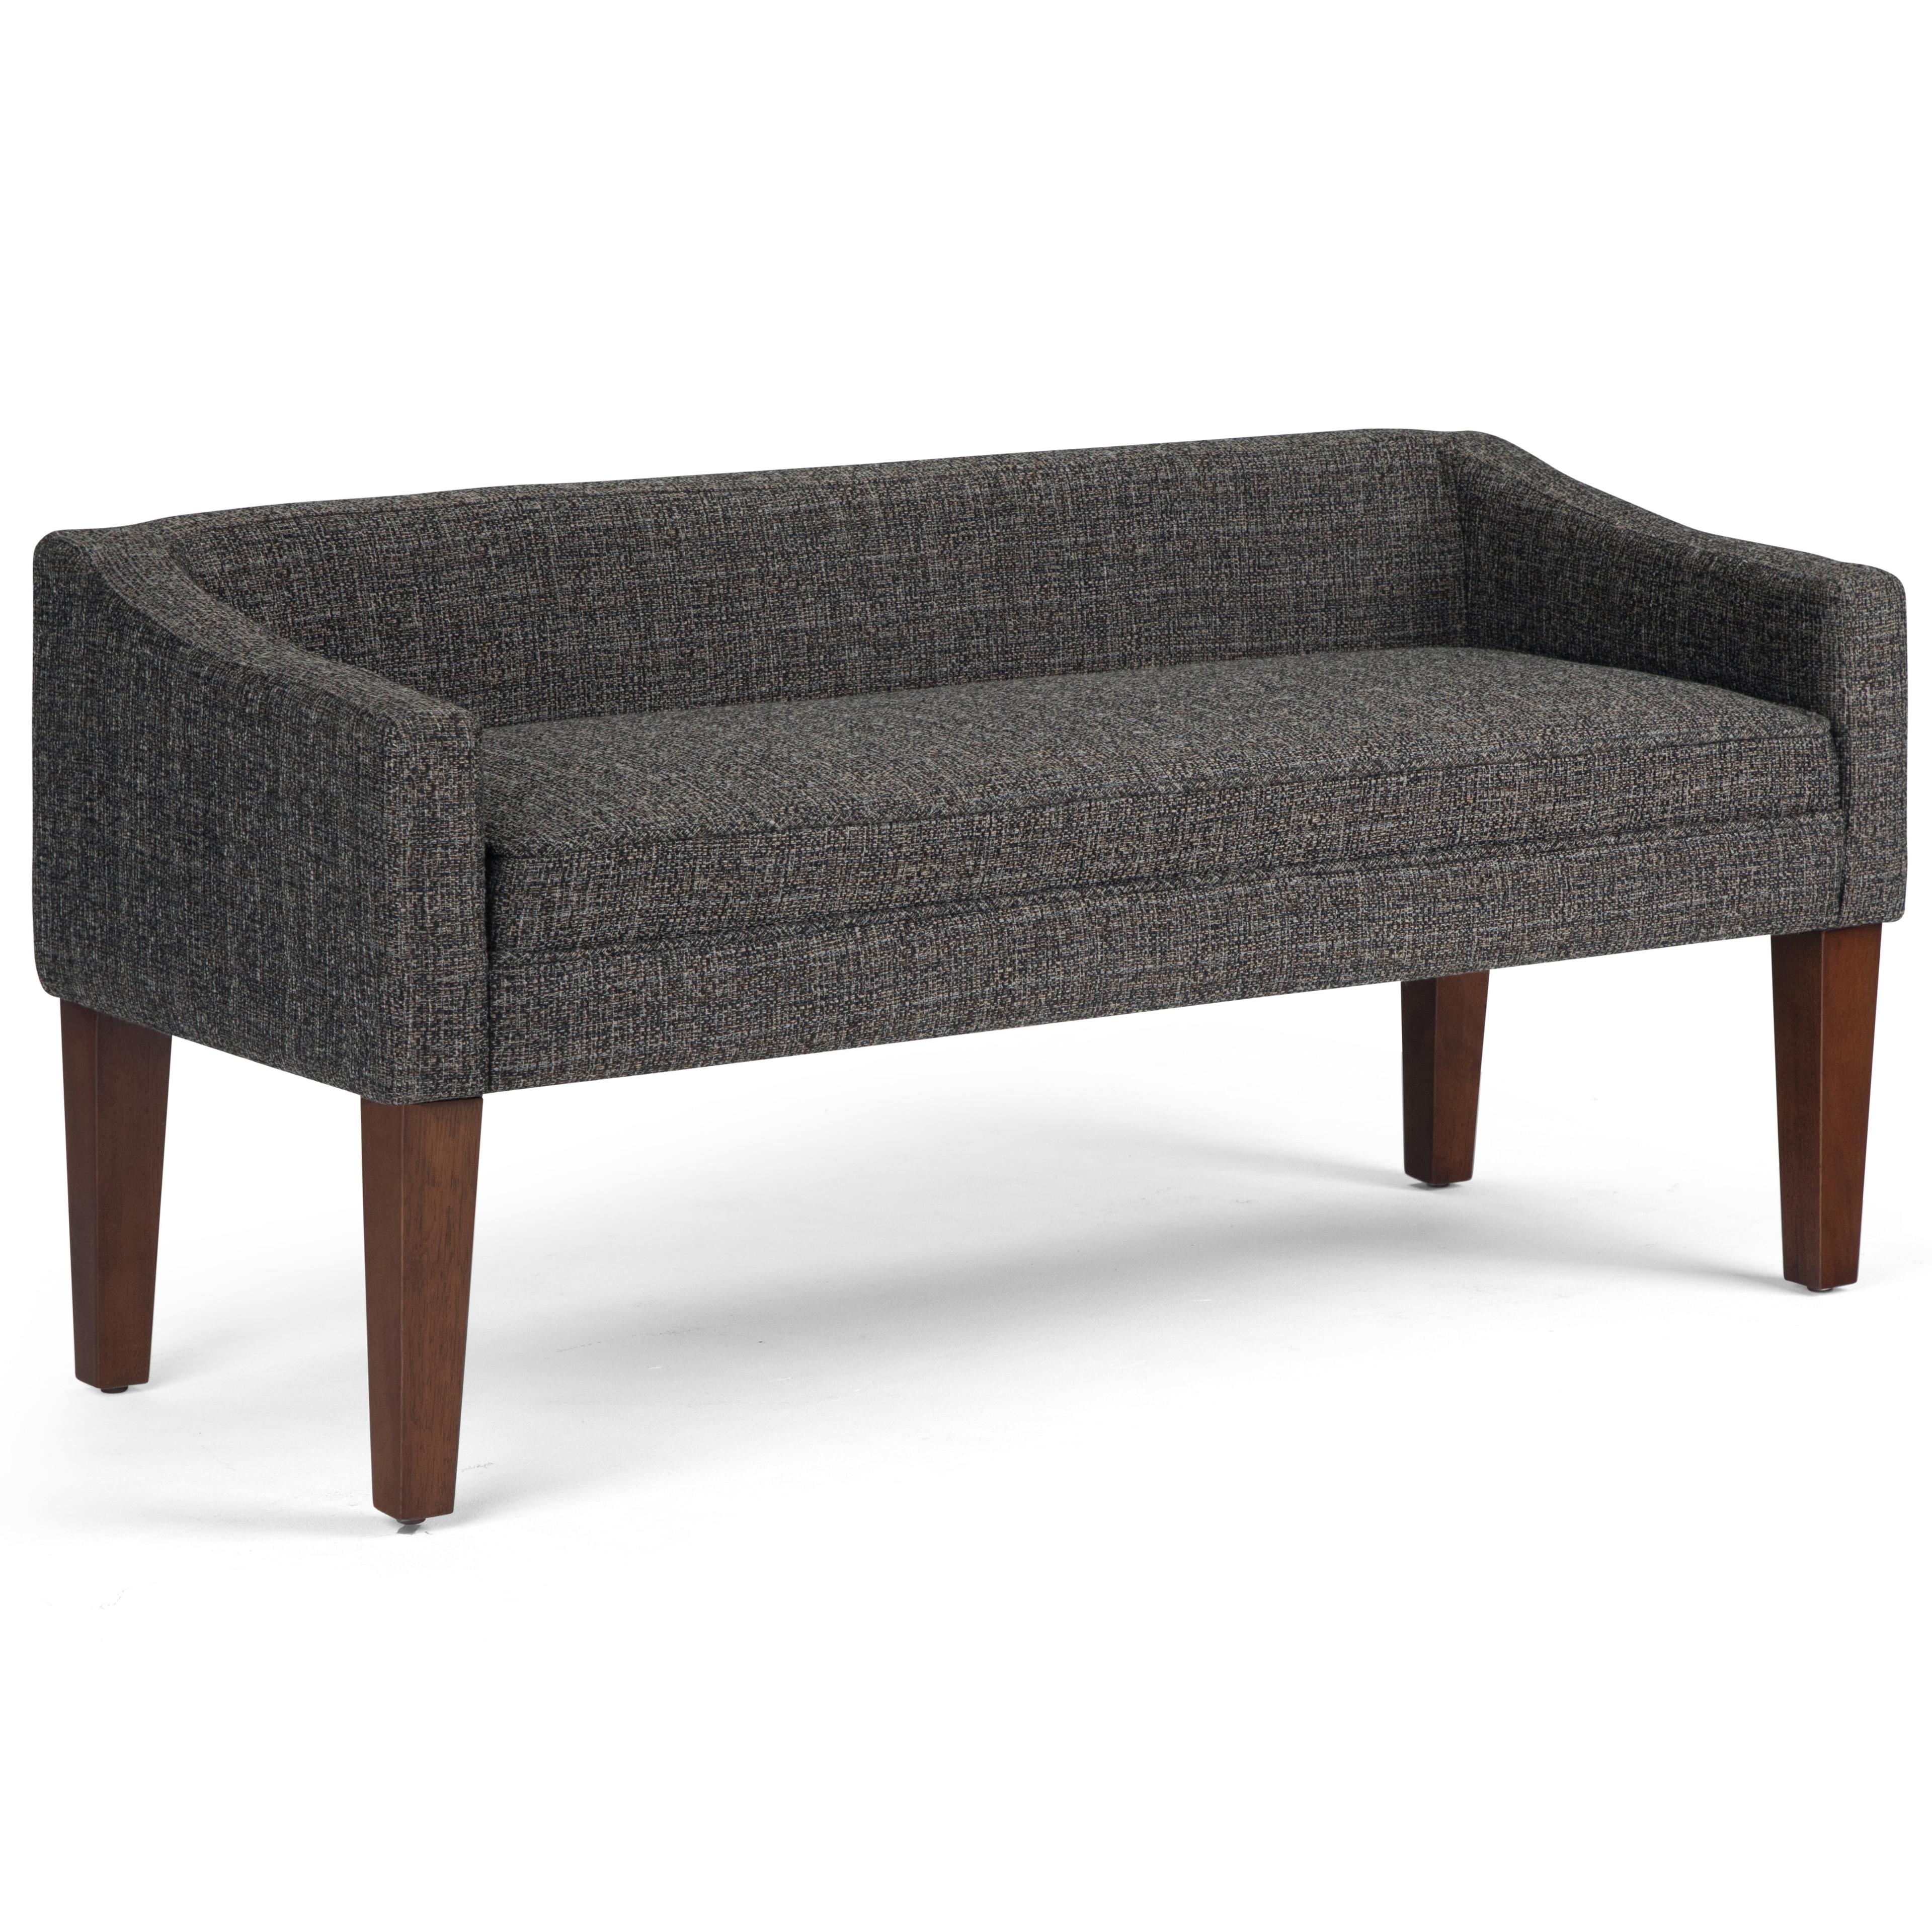 Parris Dark Grey Tweed-Look Upholstered Bench with Swooped Arms